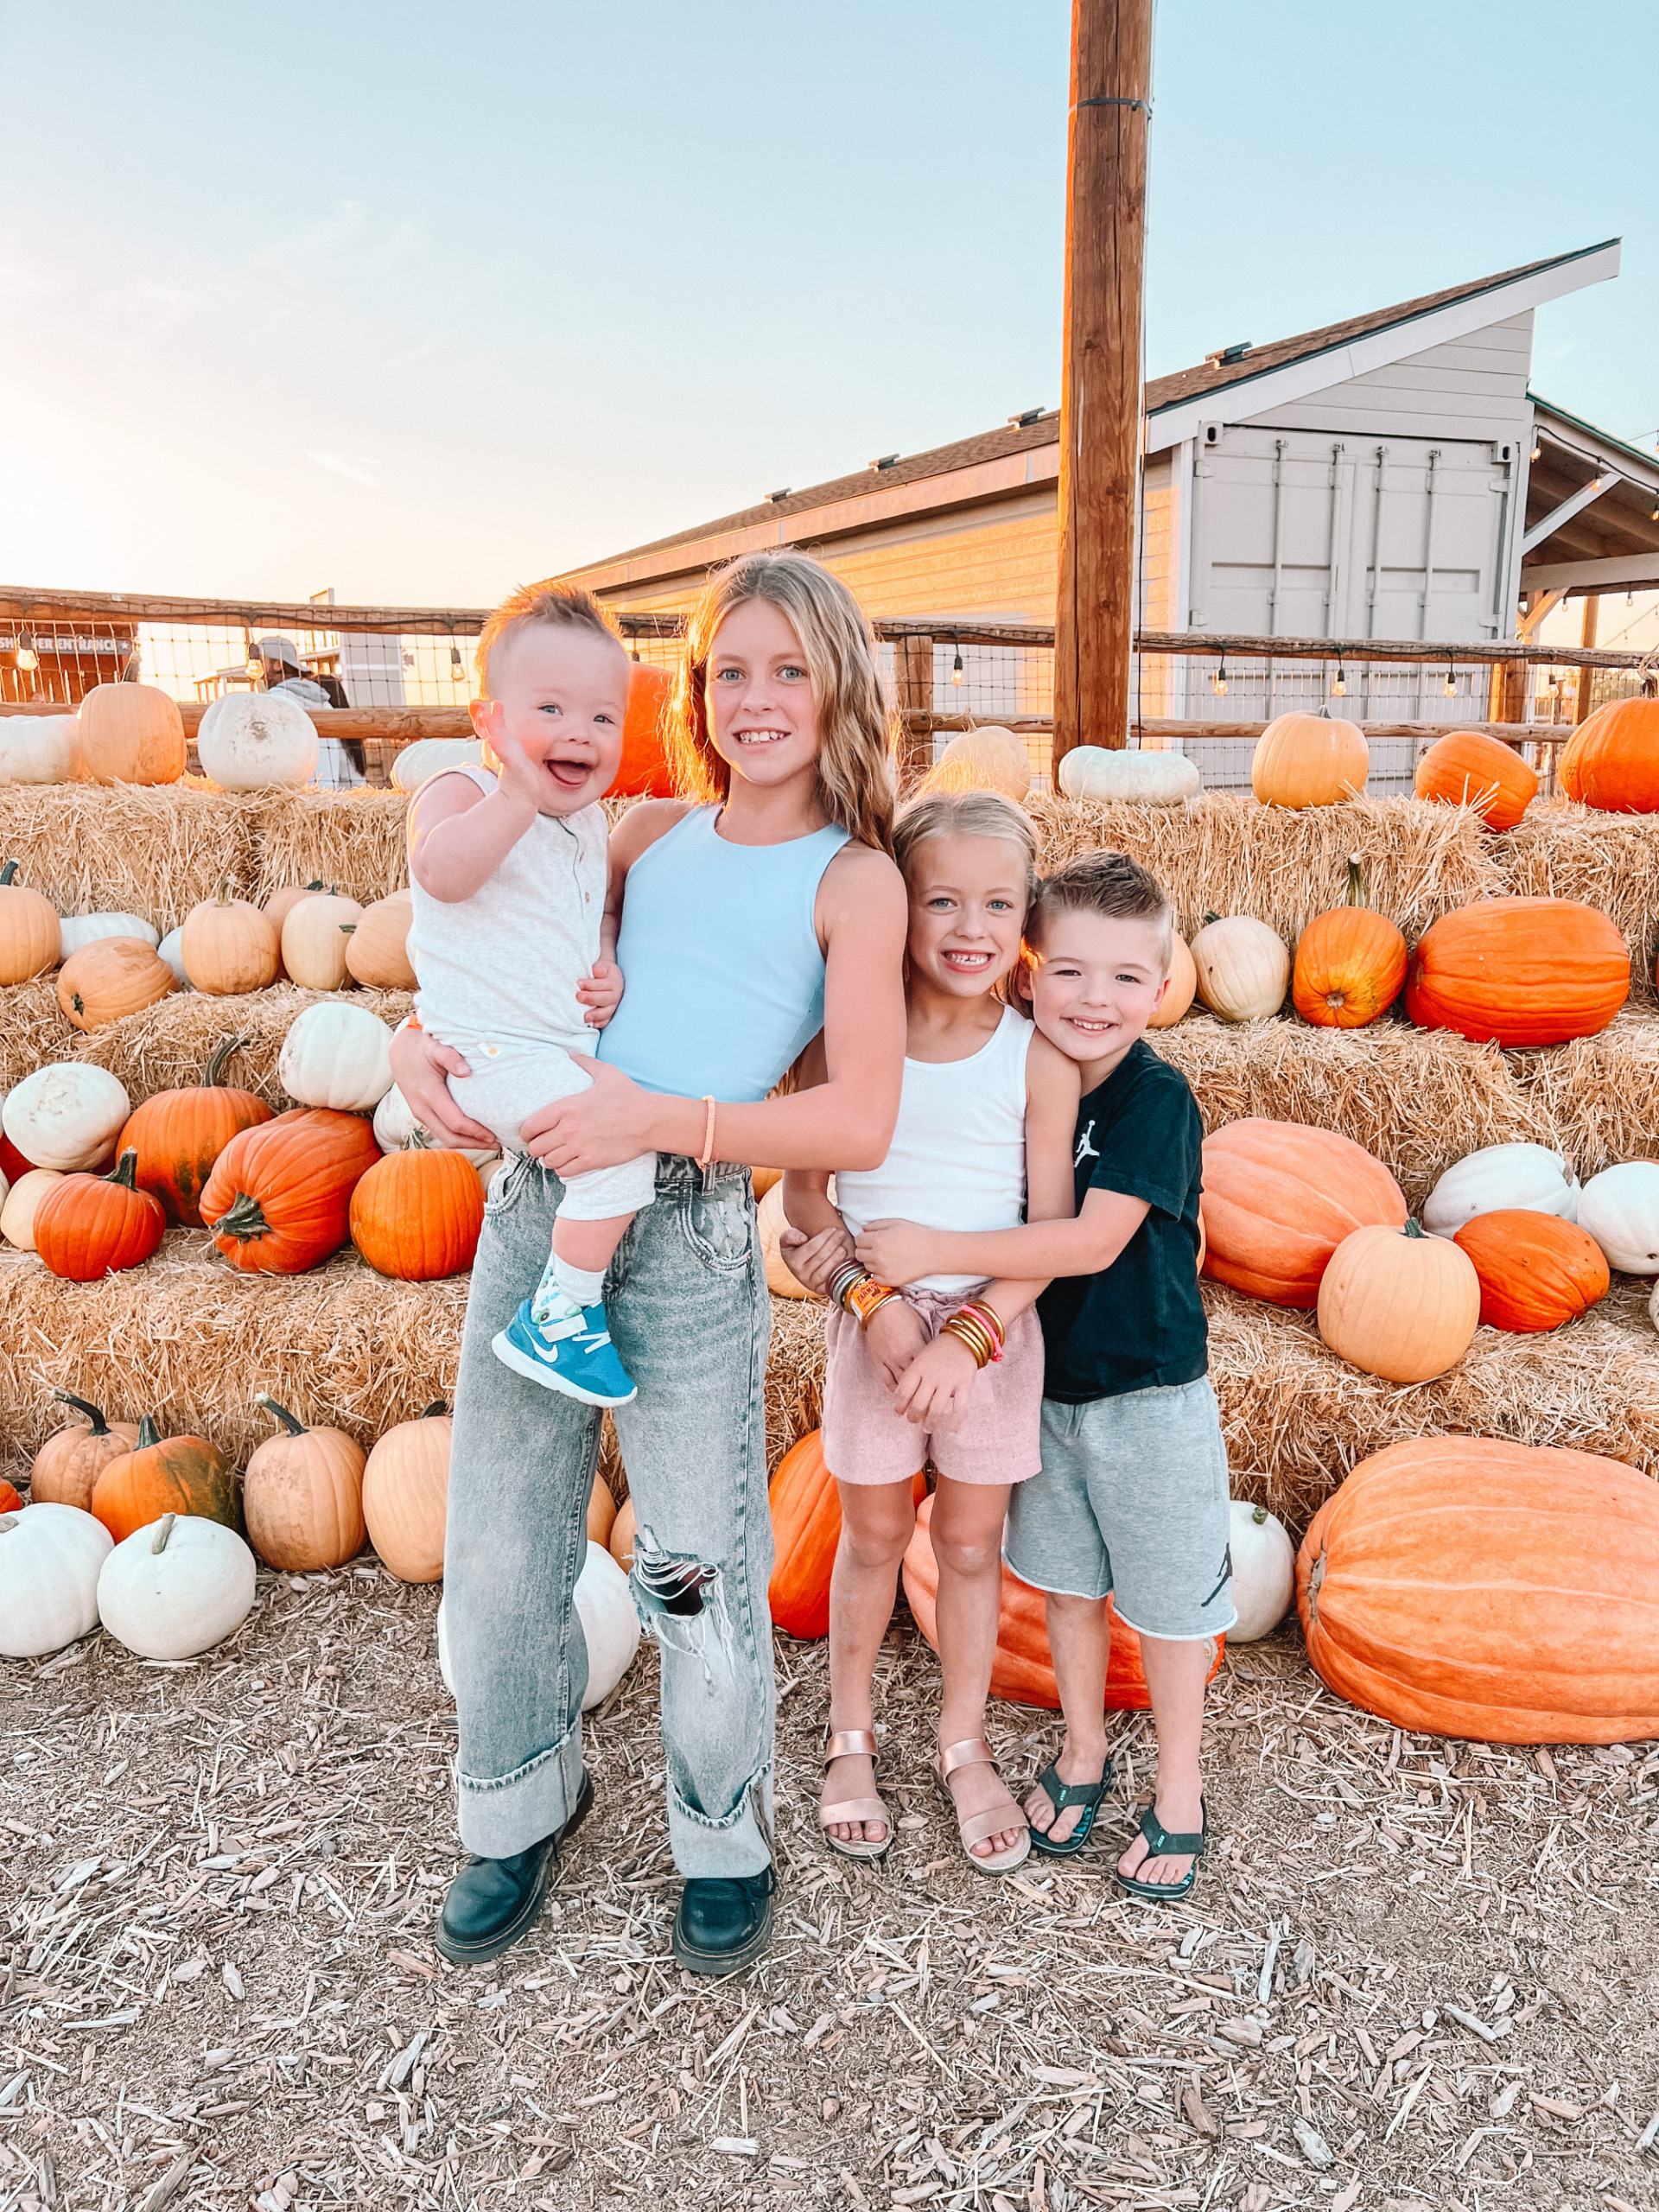 kailee wright pumpkin patch